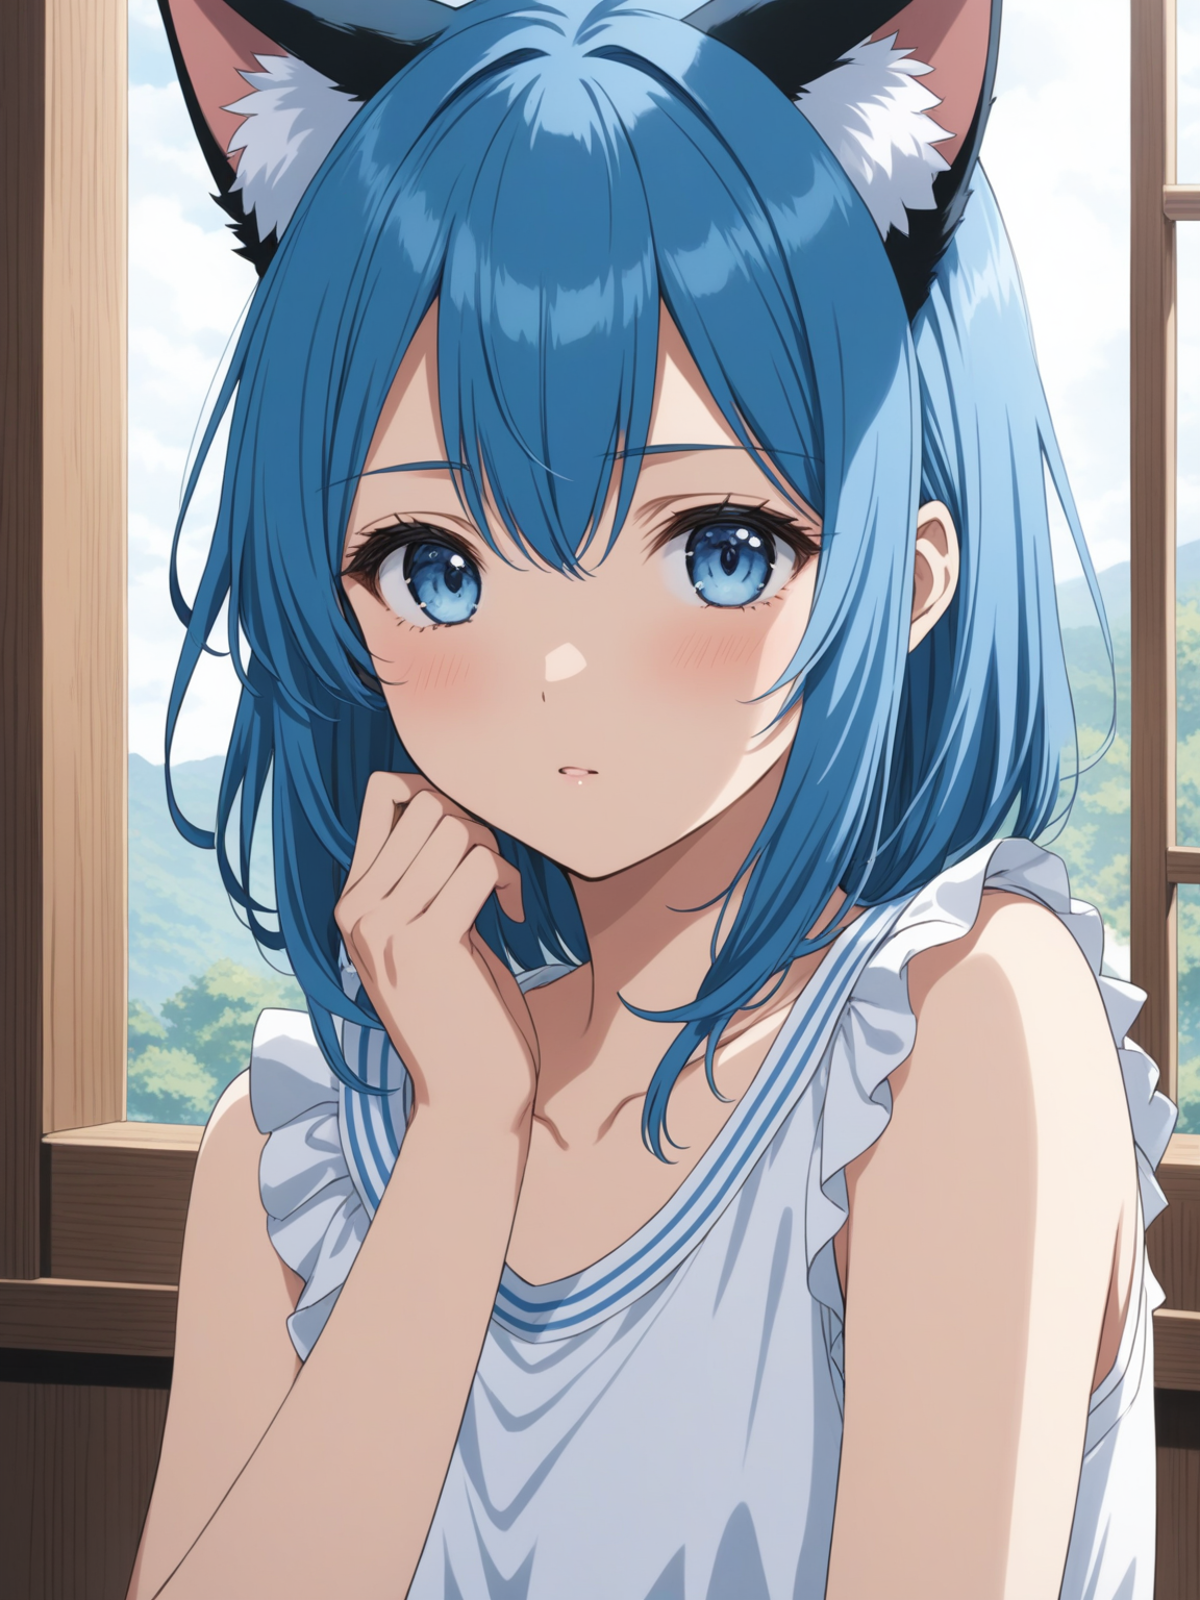 A blue-haired girl with blue eyes wearing a white and blue dress.